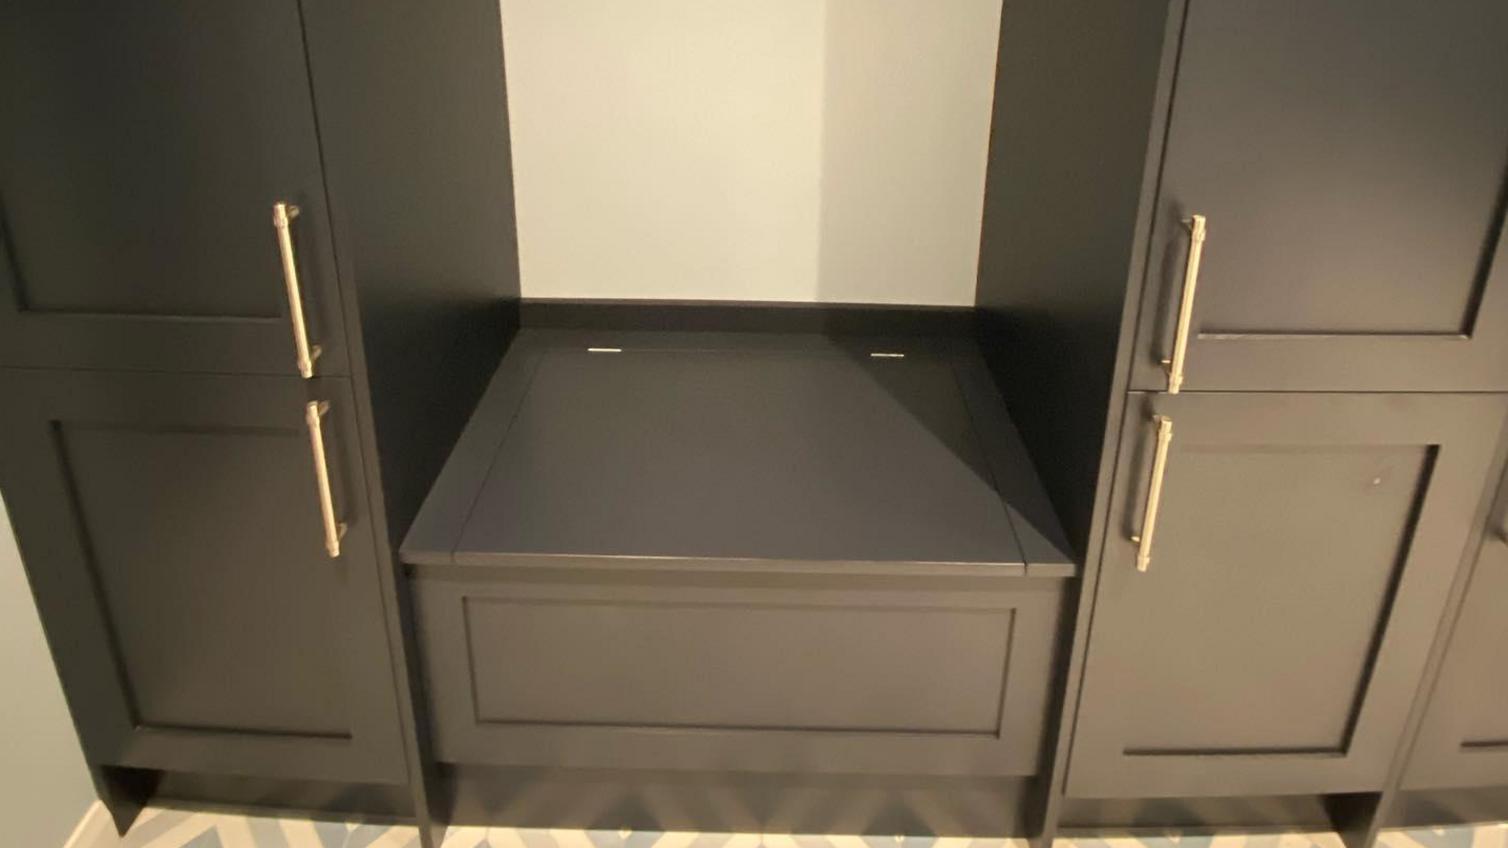 Bespoke boot room storage idea using base cabinets and a piano hinge lid for a seat with storage.